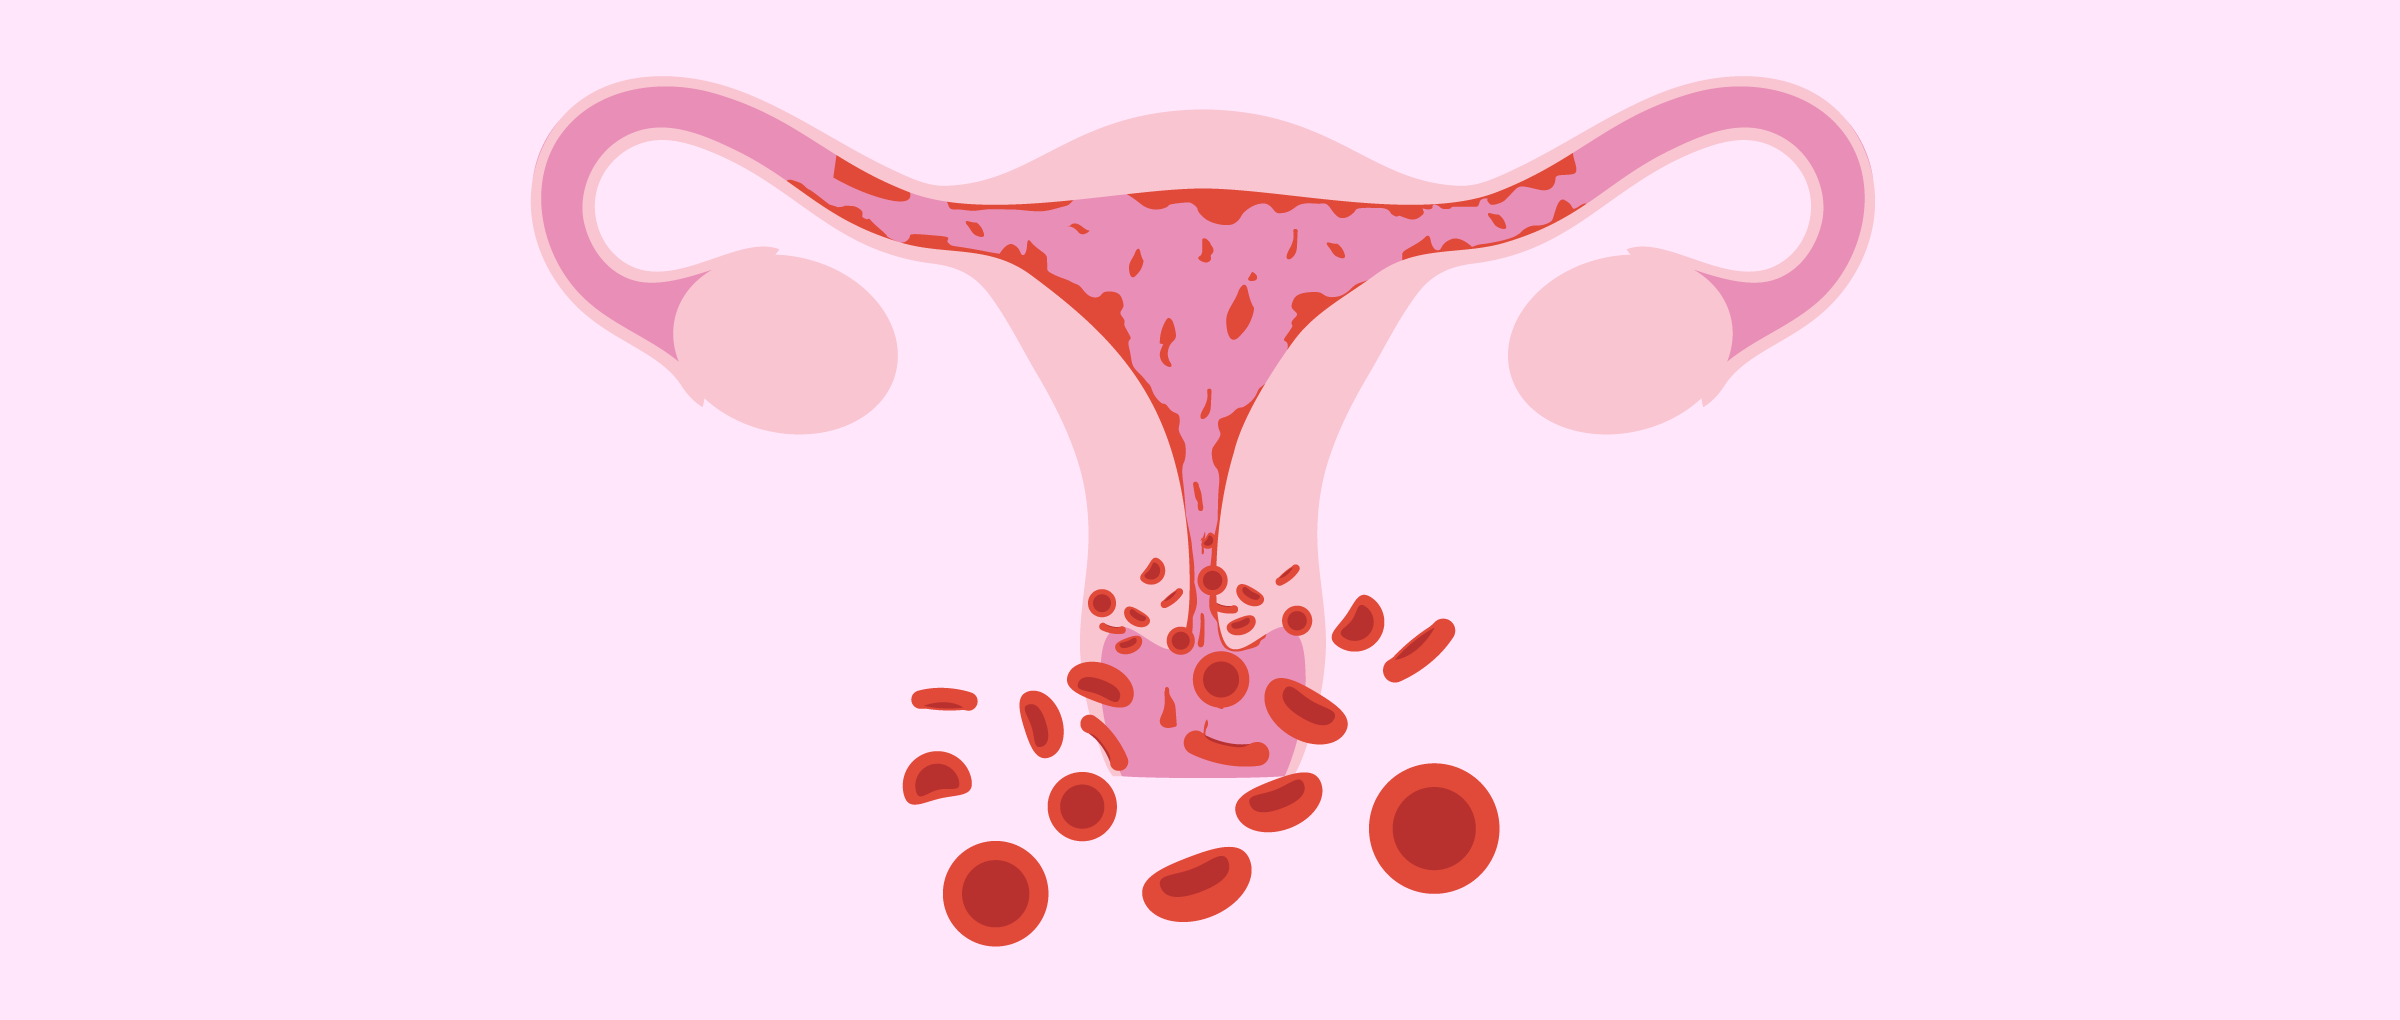 What are some medical conditions that uterine cryoablation helps?